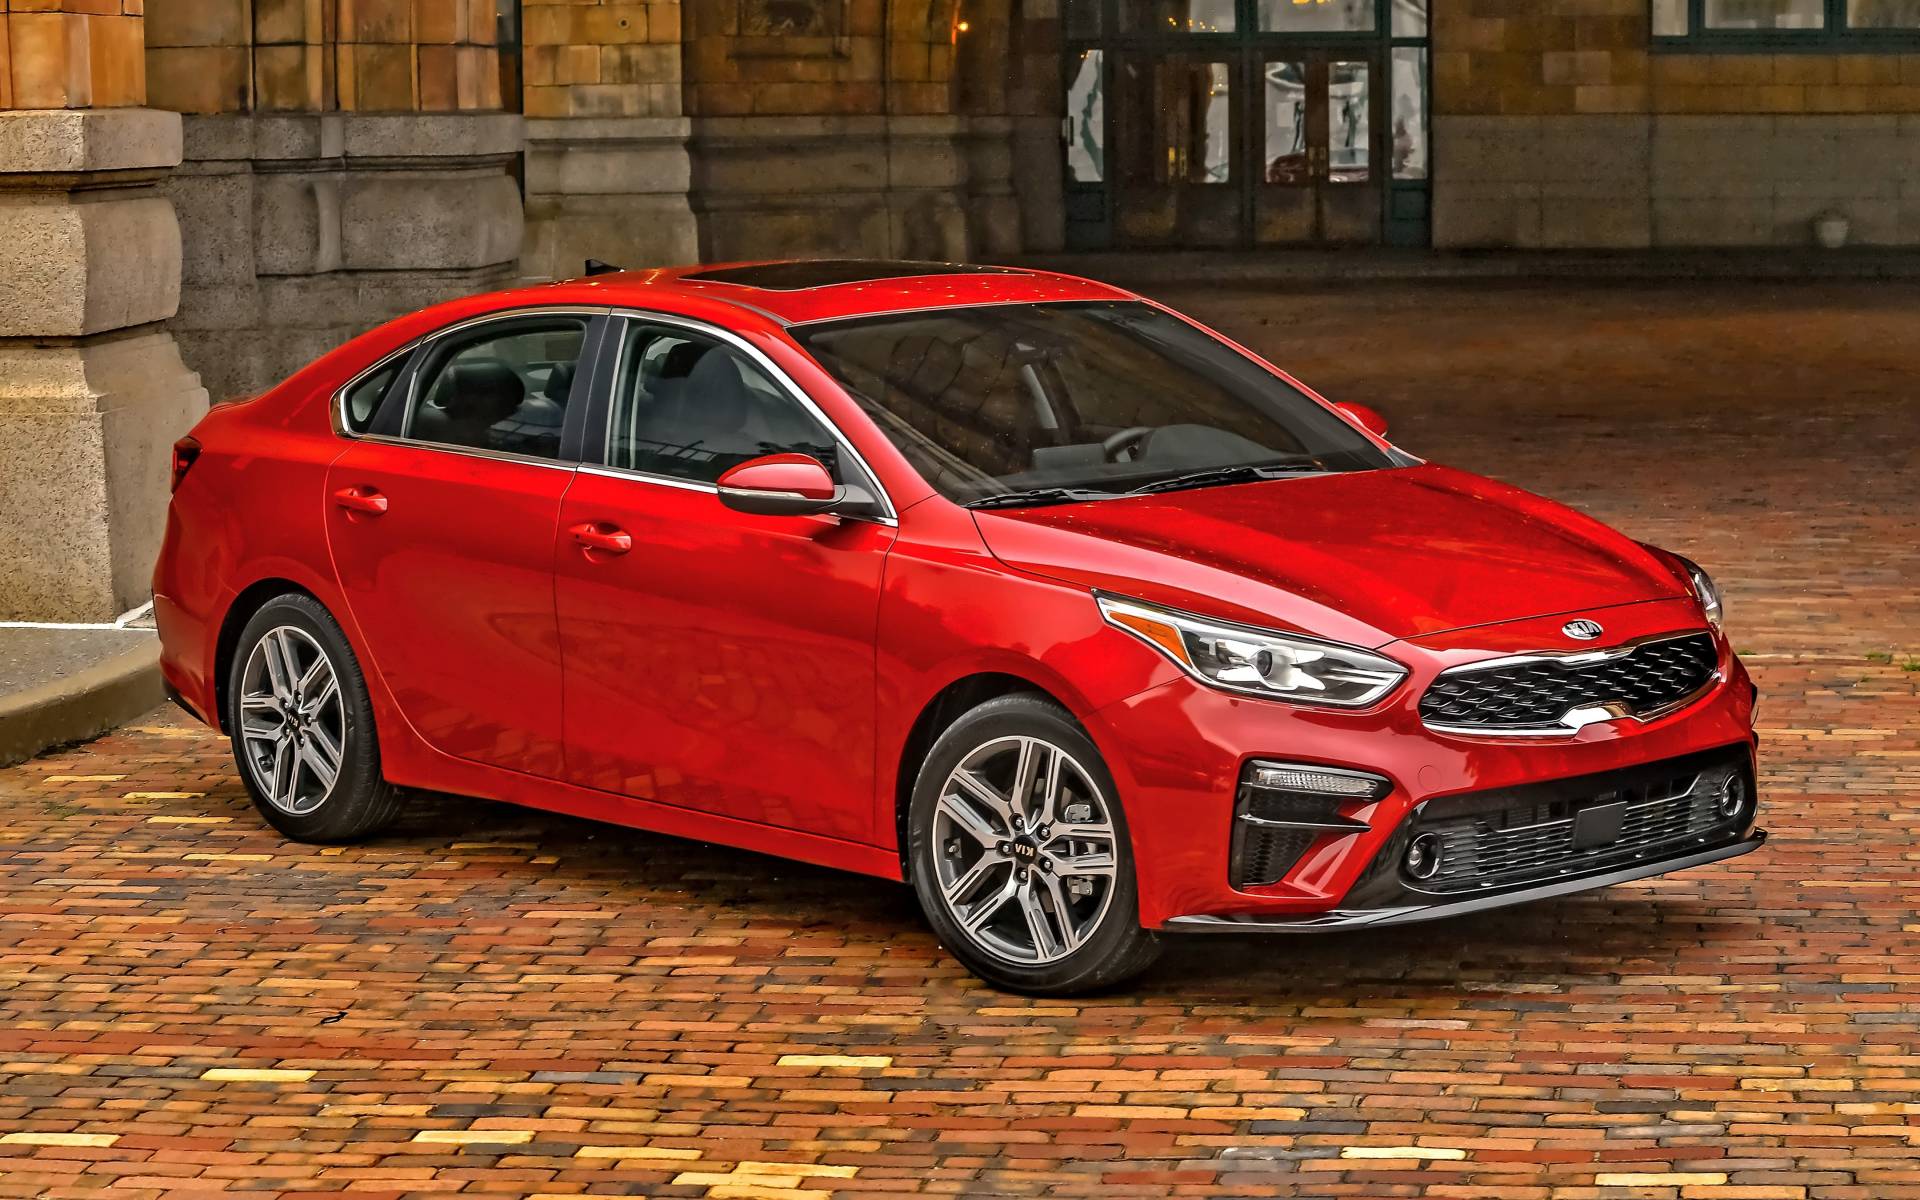 2020 Kia Forte LX (man) Specifications - The Car Guide